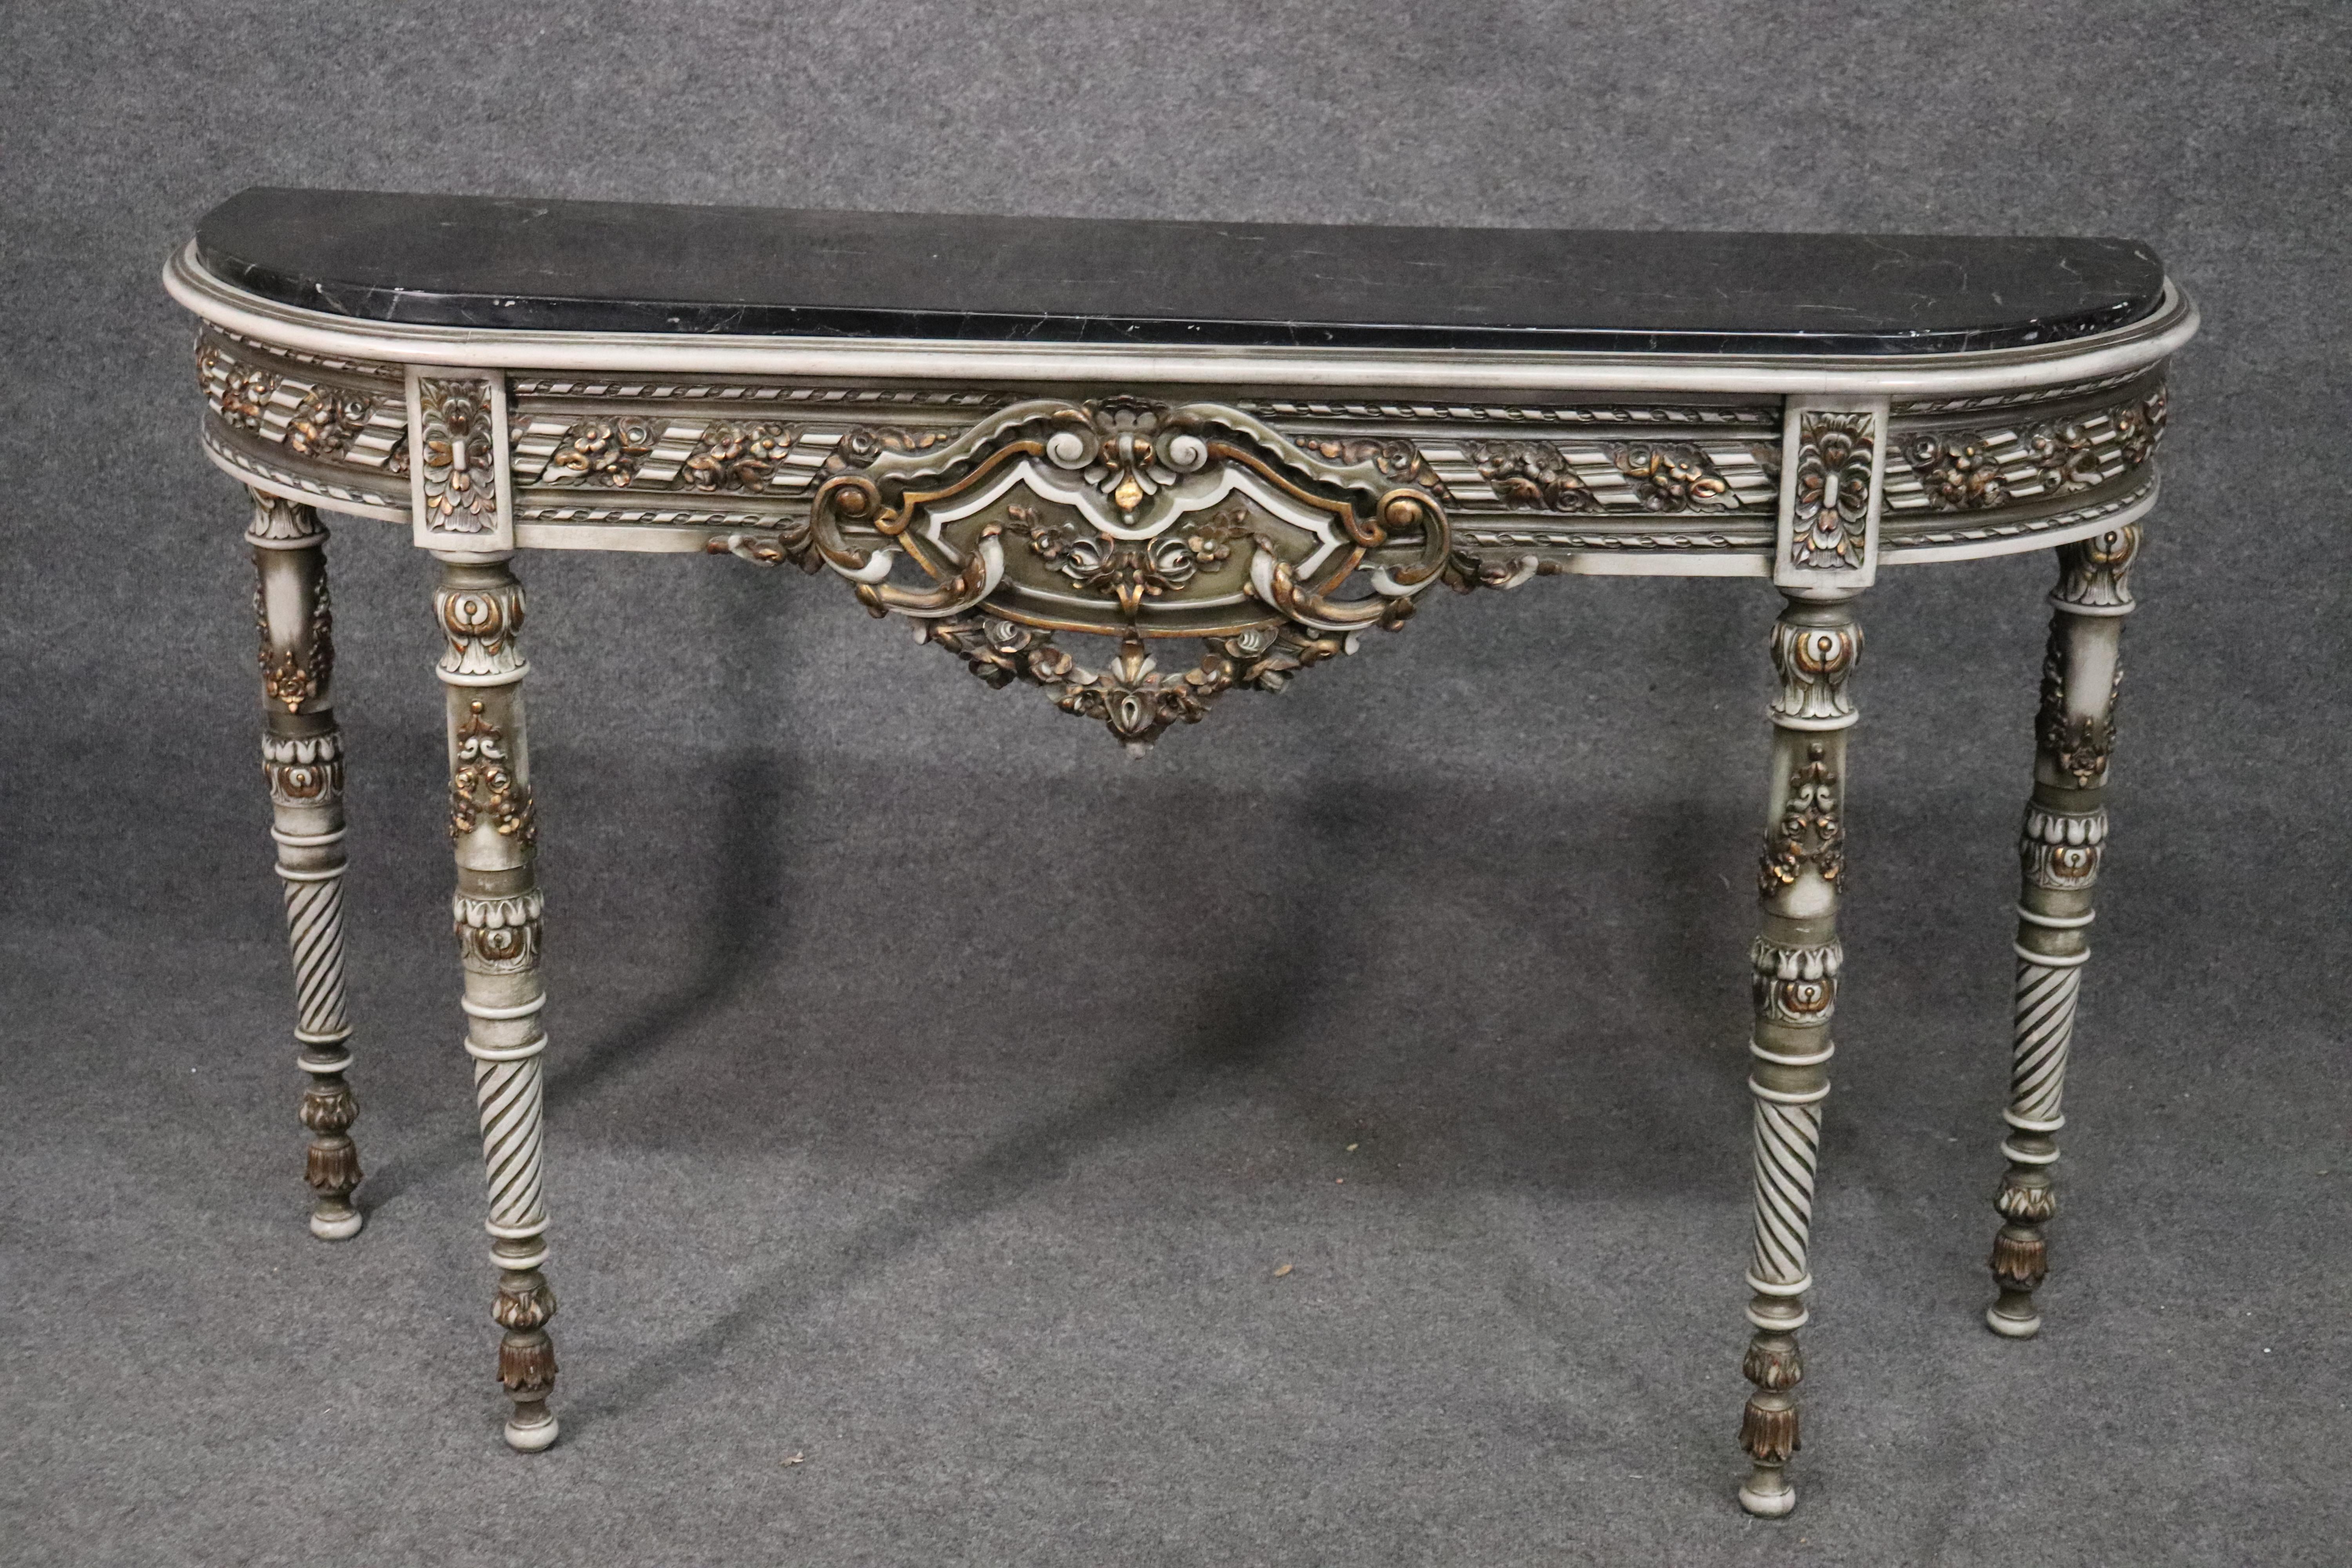 This is a spectacular French paint decorated marble top console table. The table features beautiful carving and a wonderful aged crème painted finish with gilded highlights. The table top is in very good condition as is the rest of the table. The